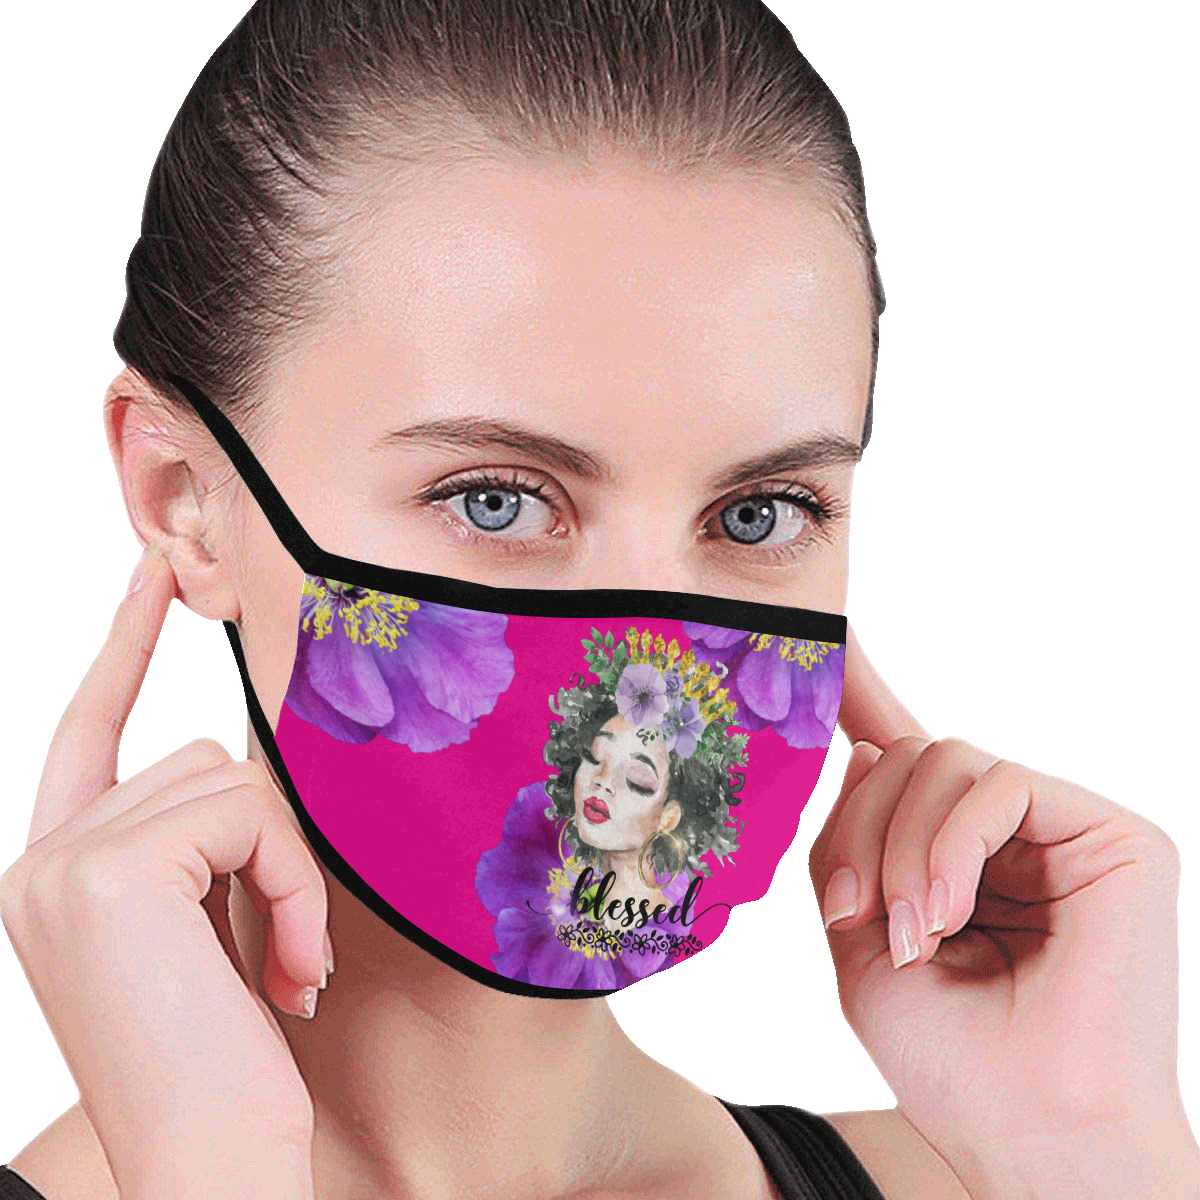 Fairlings Delight's The Word Collection- Blessed 53086a12 Mouth Mask